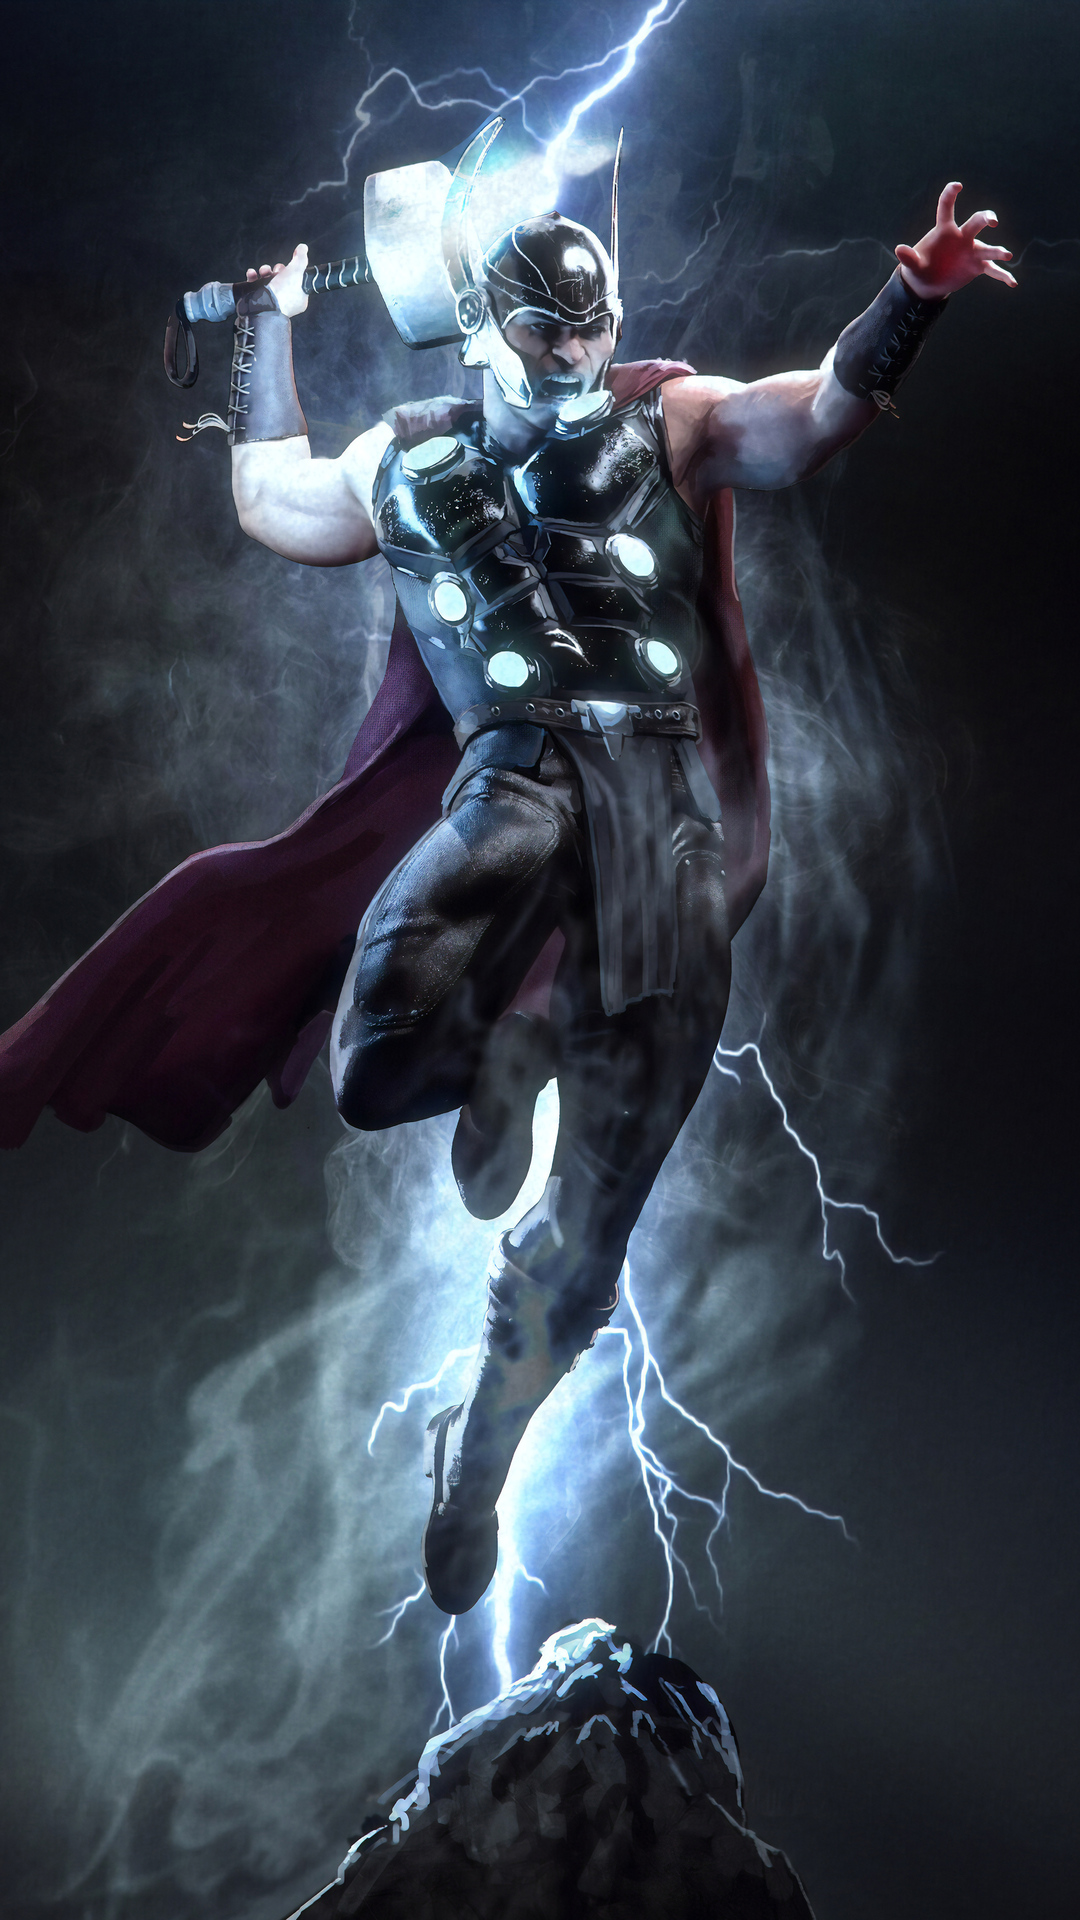 1080x1920 Thor Marvel Superhero Iphone 7,6s,6 Plus, Pixel xl ,One Plus  3,3t,5 HD 4k Wallpapers, Images, Backgrounds, Photos and Pictures